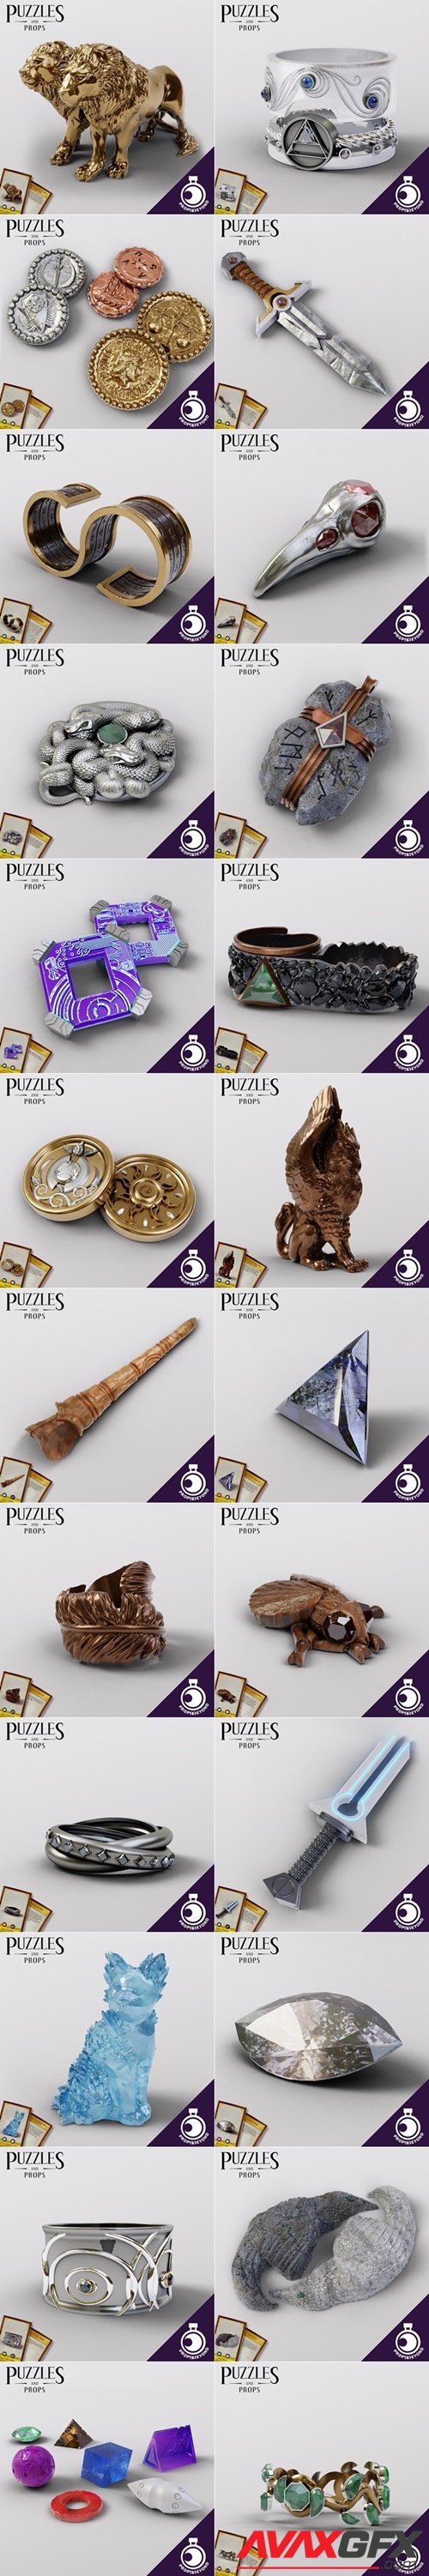 Puzzles and Props Collection - Part 1 – 3D Printable STL